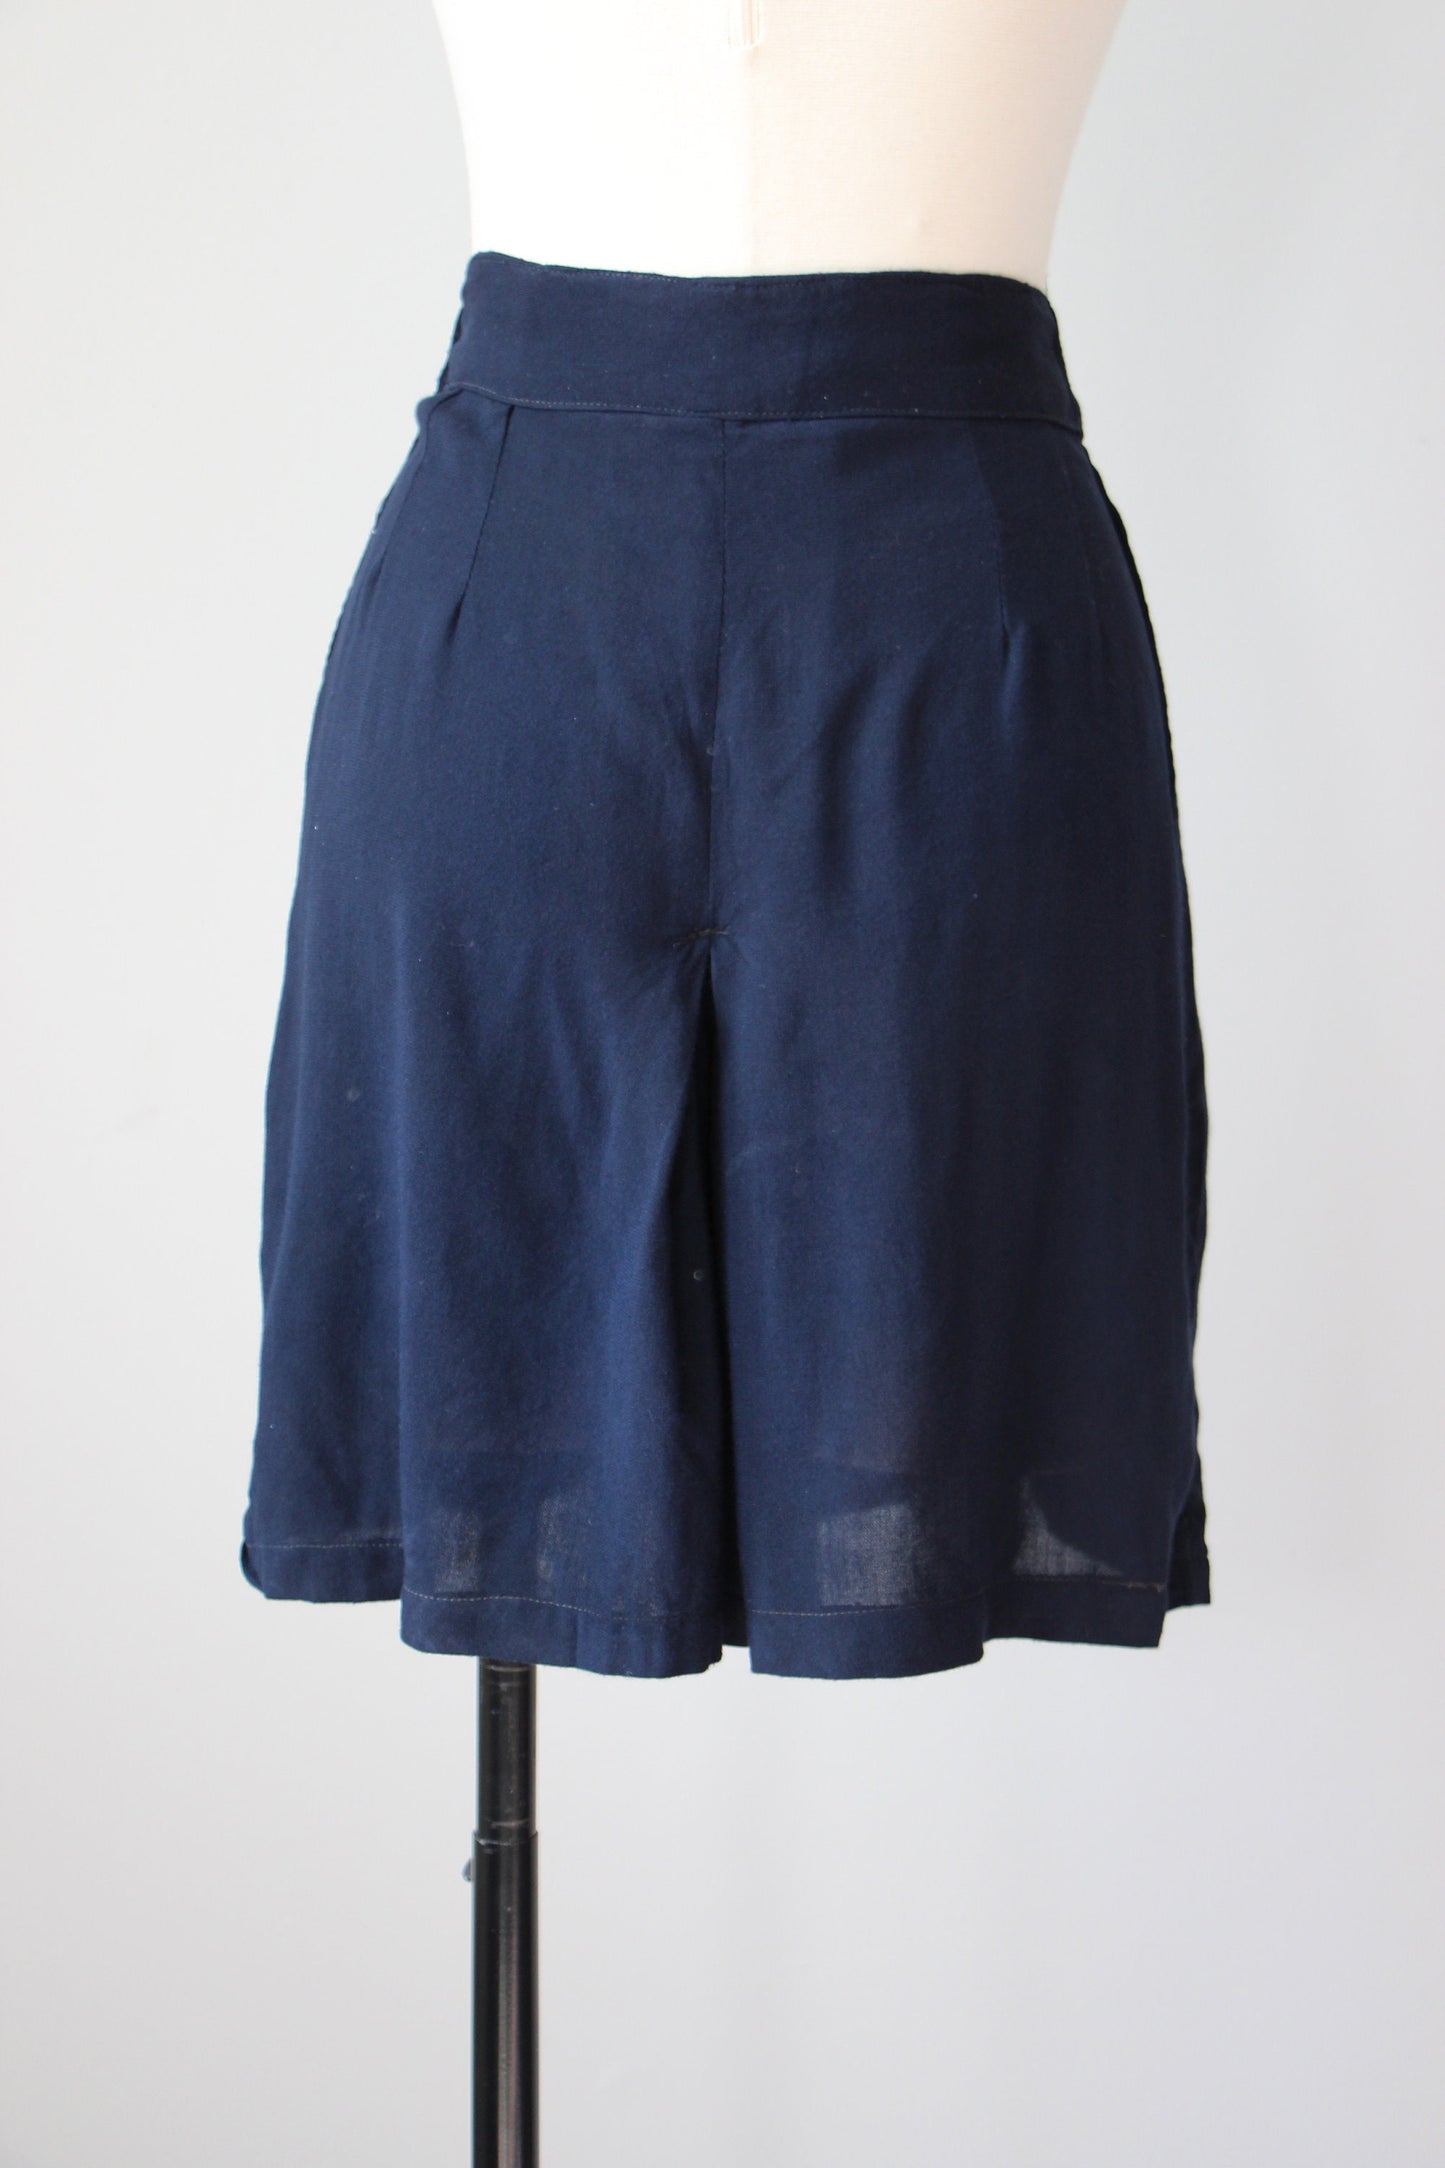 Vintage 1940s to 1950s British Navy WRENS Rayon Side Button High Waist Split Skirt Shorts RARE Size XS to L